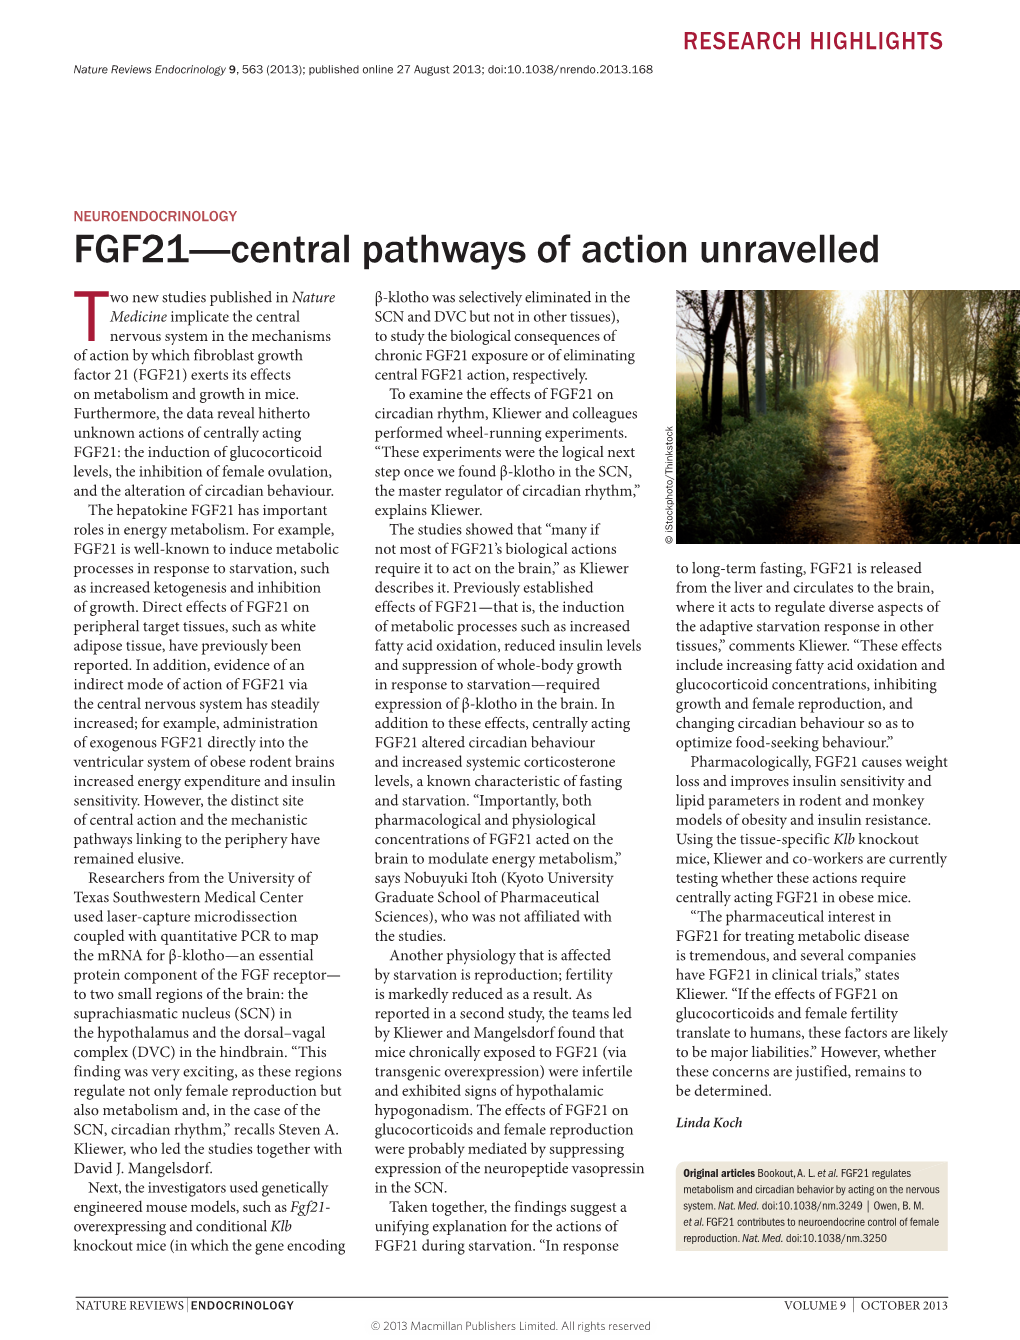 FGF21—Central Pathways of Action Unravelled